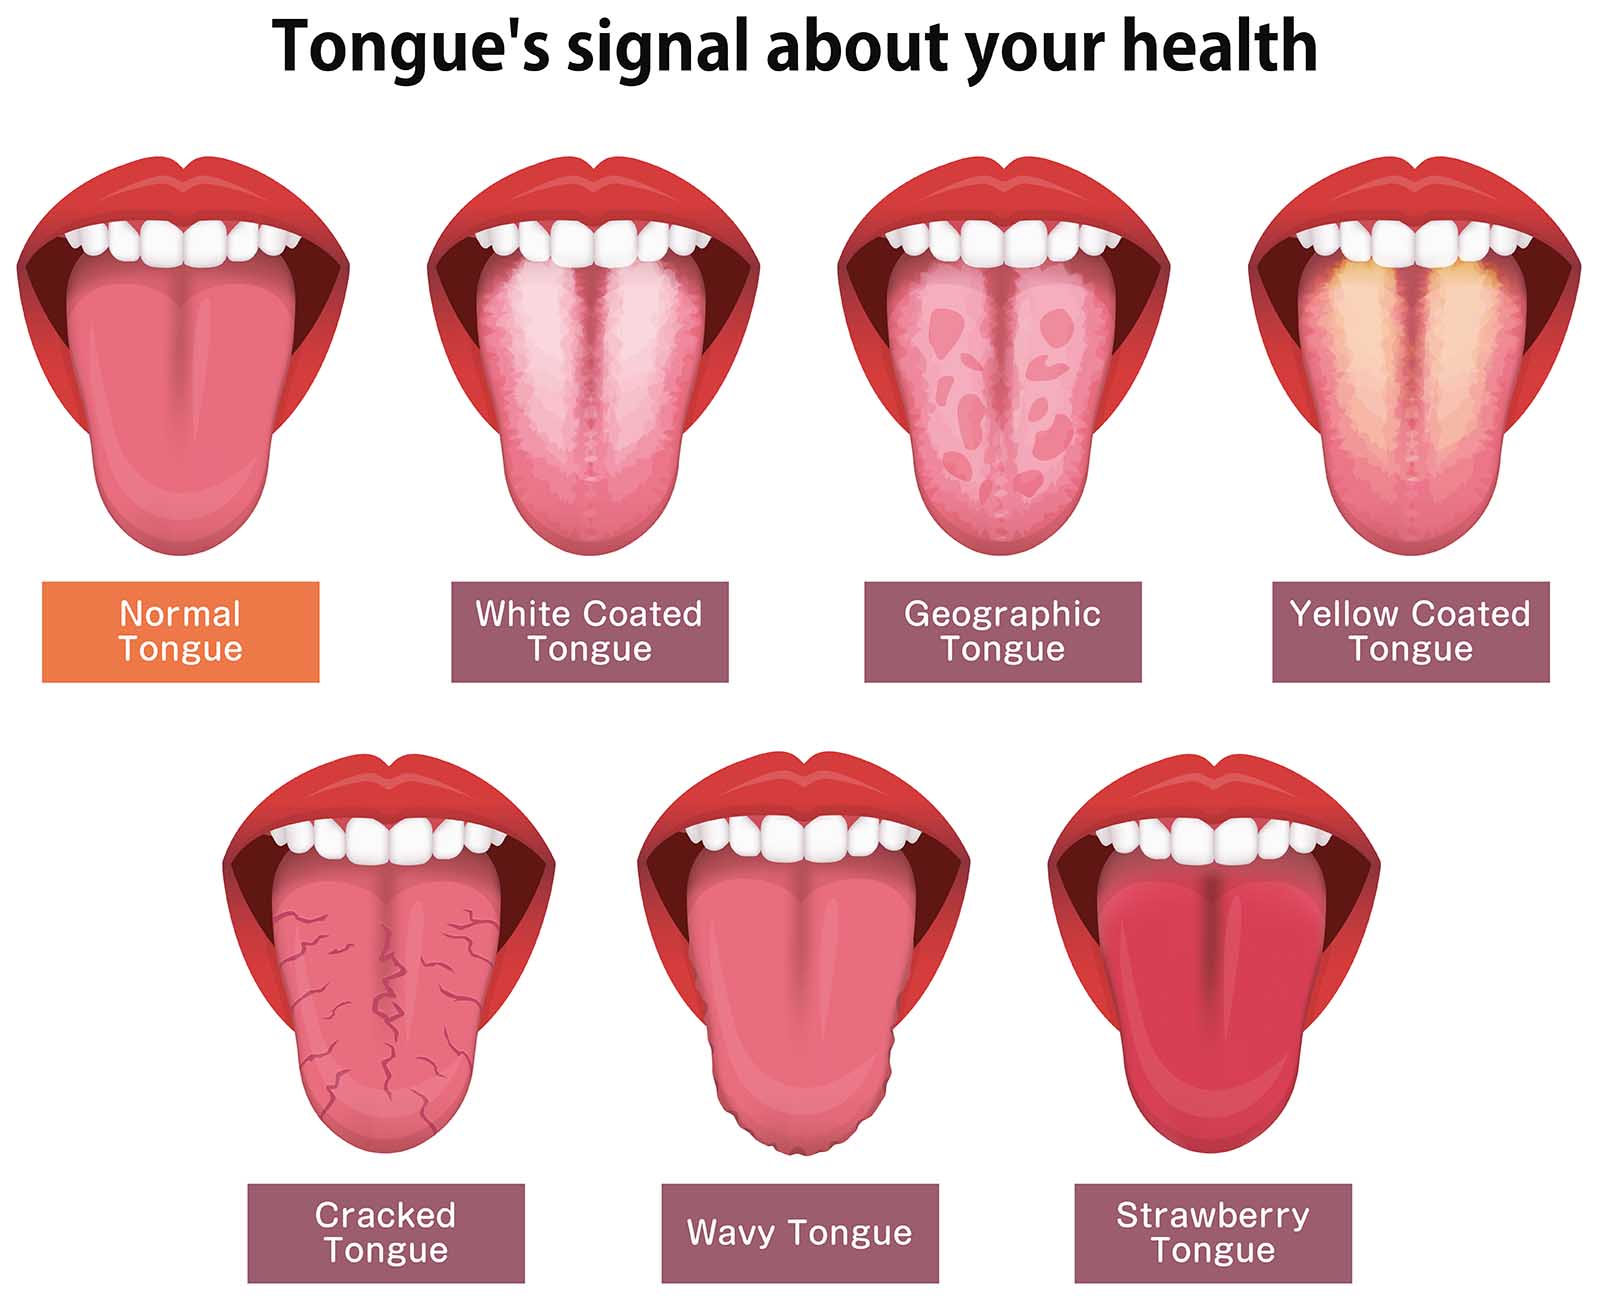 Deciphering Health Clues from Your Tongue